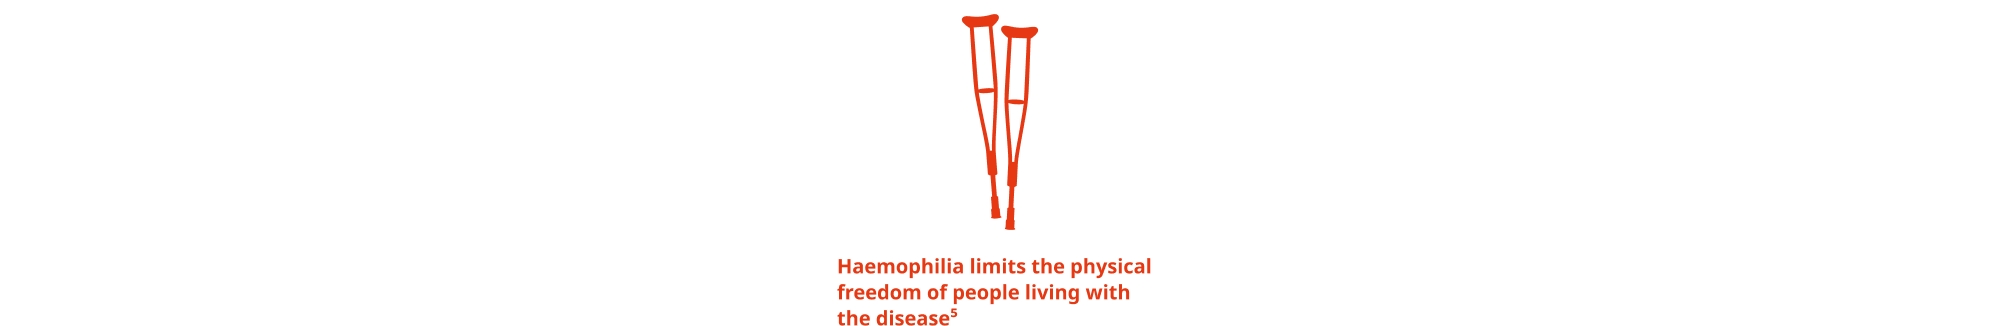 Haemophilia limits the physical freedom